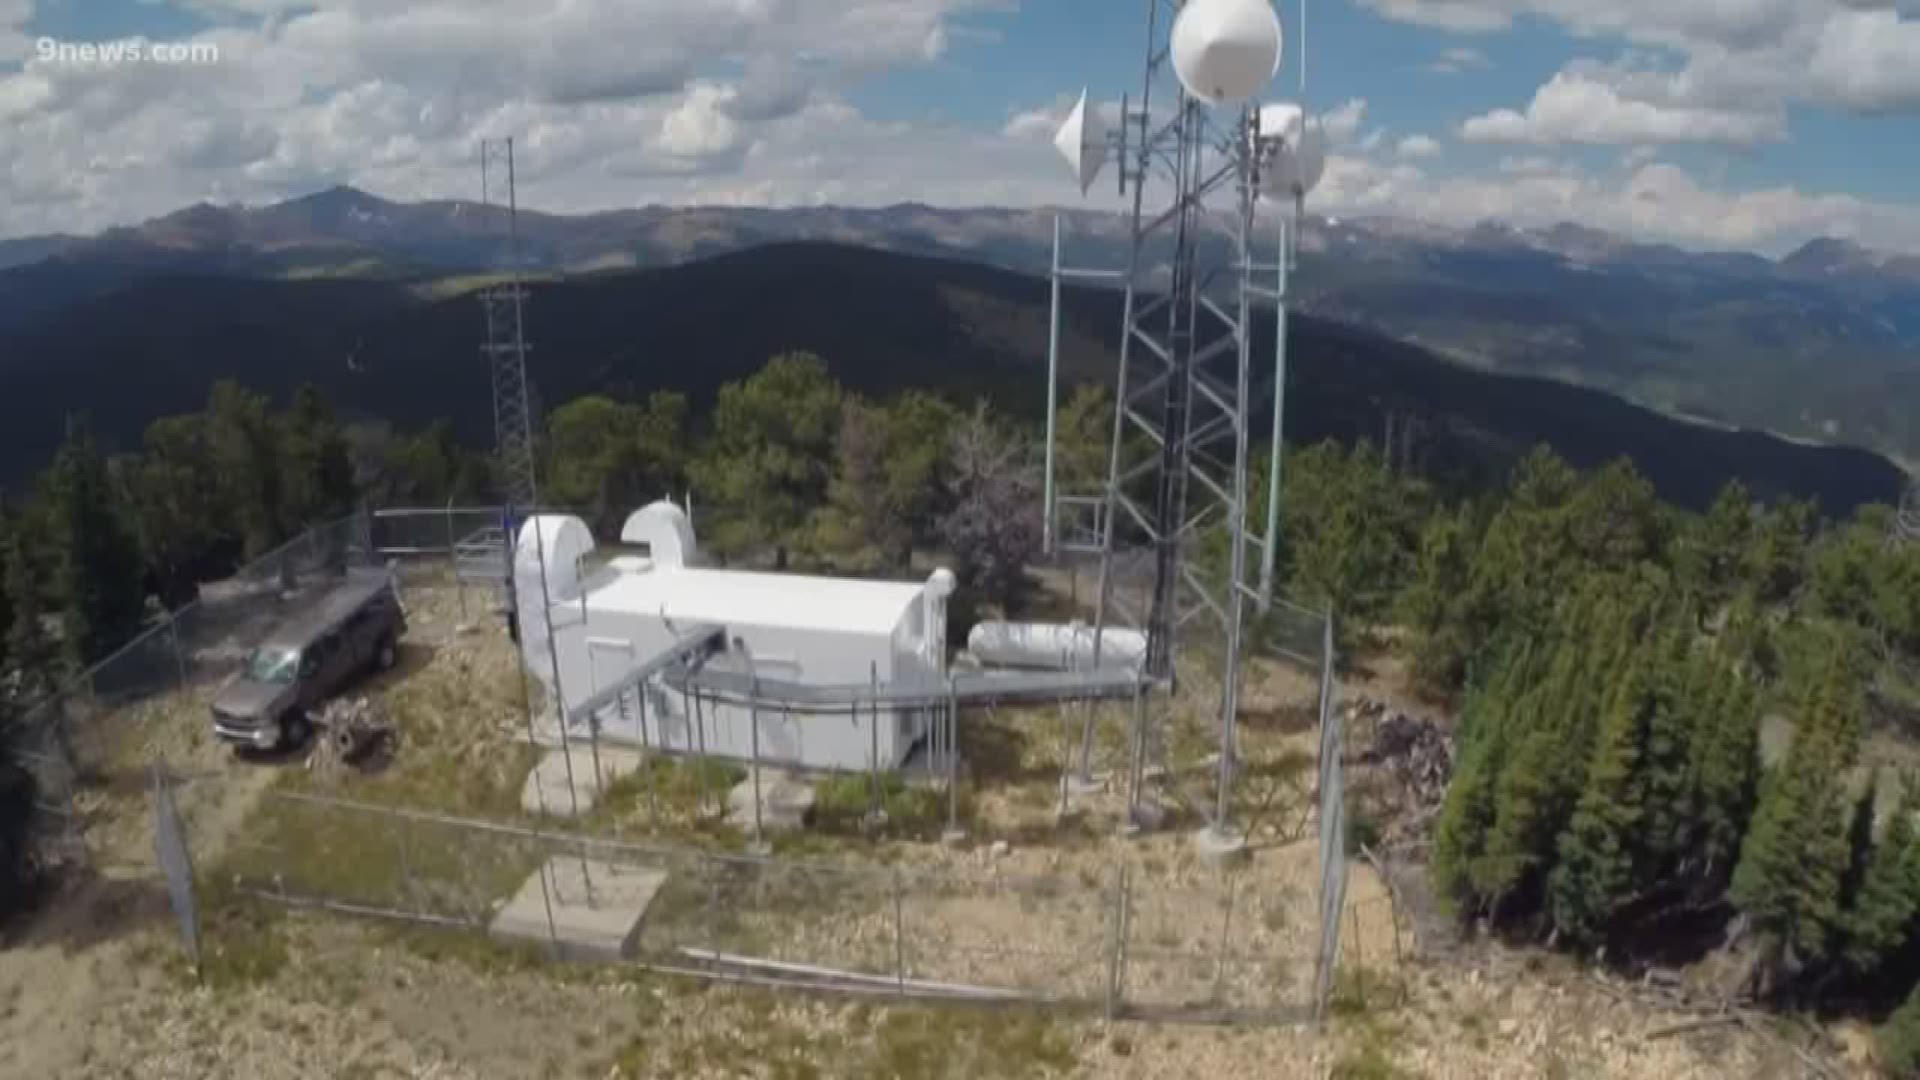 Pilots will soon be able to watch the weather change with Colorado Dept. of Transportation's "Automated Weather Observing System" camera system.